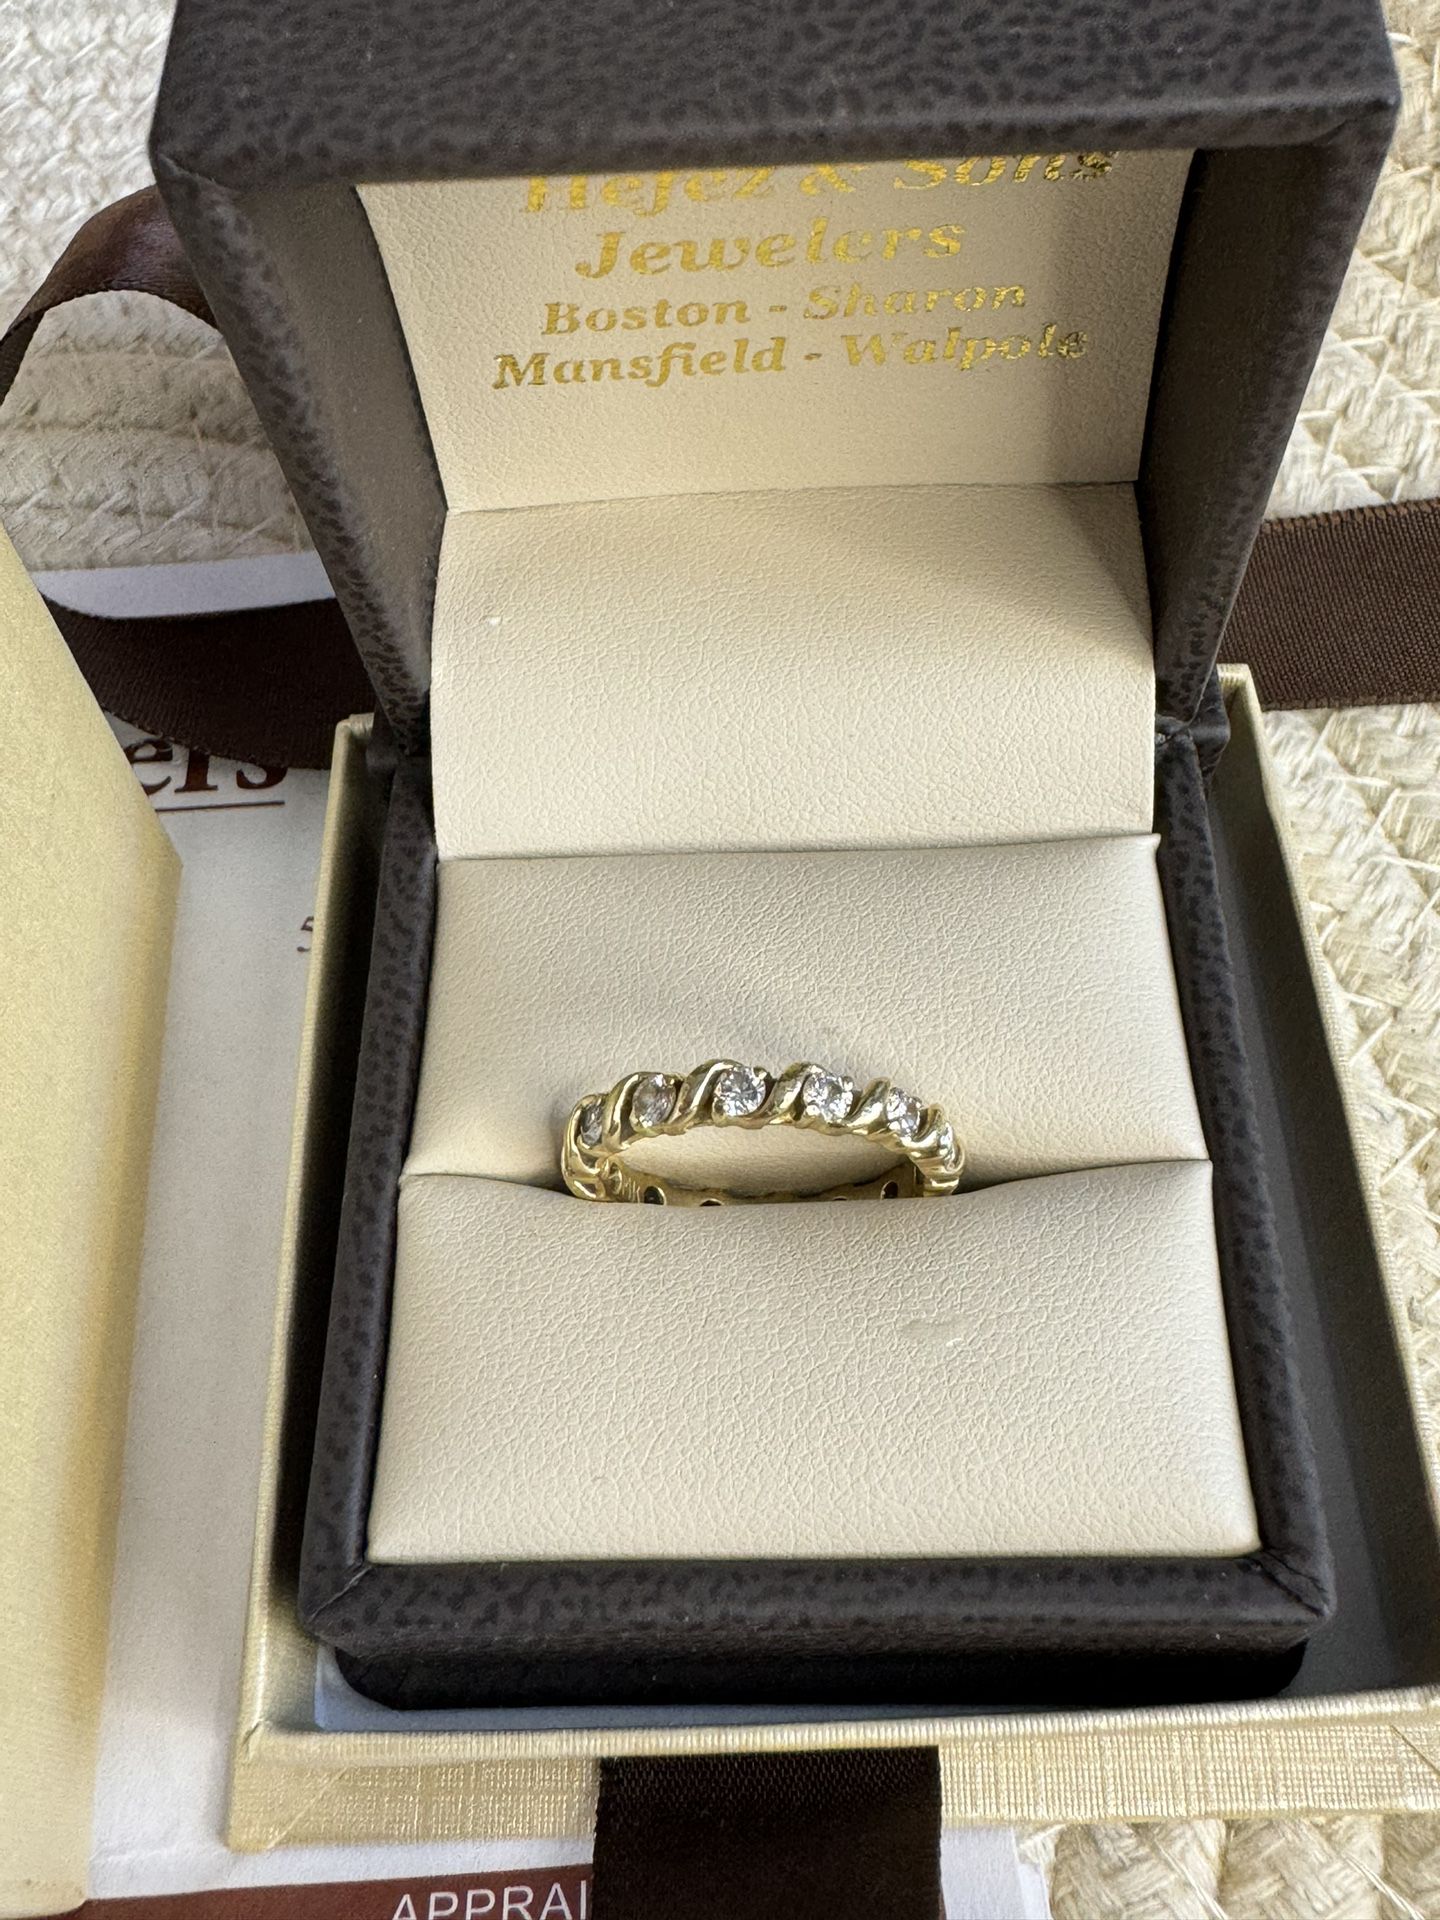 7.25 diamond gold eternity band ring with appraisal 